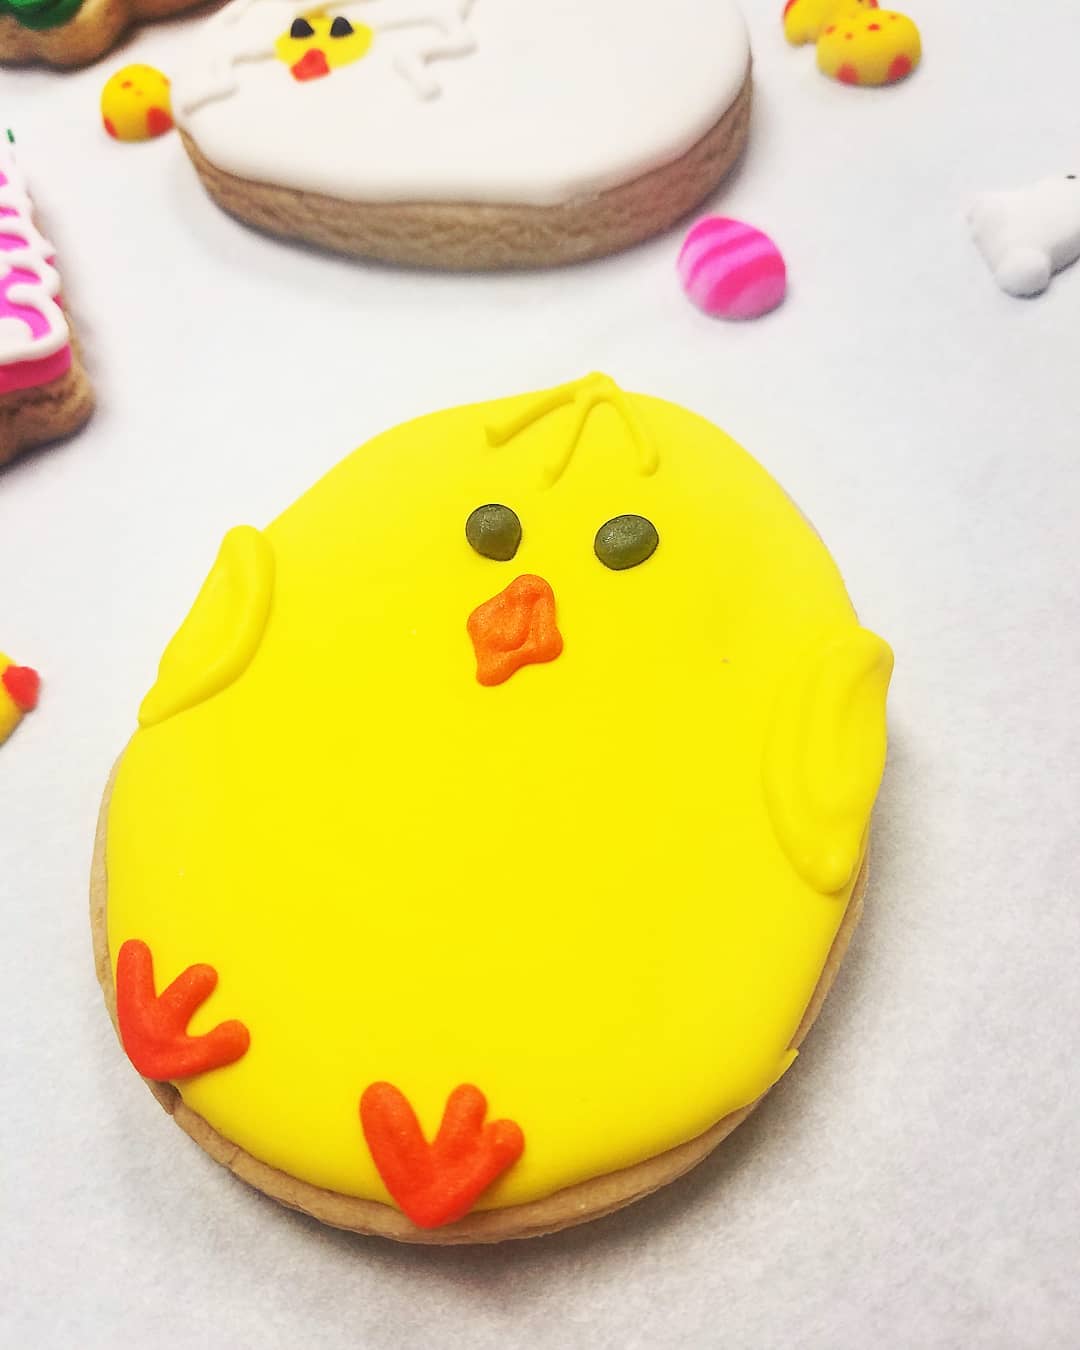 Easter Cookies for the Peeps! Ready. 🐰
We LOVE Easter Cookies!
🐥
Each cookie is completely hand made and decorated.
🐣
Baskets here we come!
🐇
Available at both locations.
🐤
@bellekitchenokc @bellekitchendd #pastry #cute #real #fresh #easter #cookies #cookie #keepitlocalok #handmade #eeeeeats #f52grams #instafood #instagood #visitokc #travelok #yummy #food #dessert #beautiful #bellekitchen